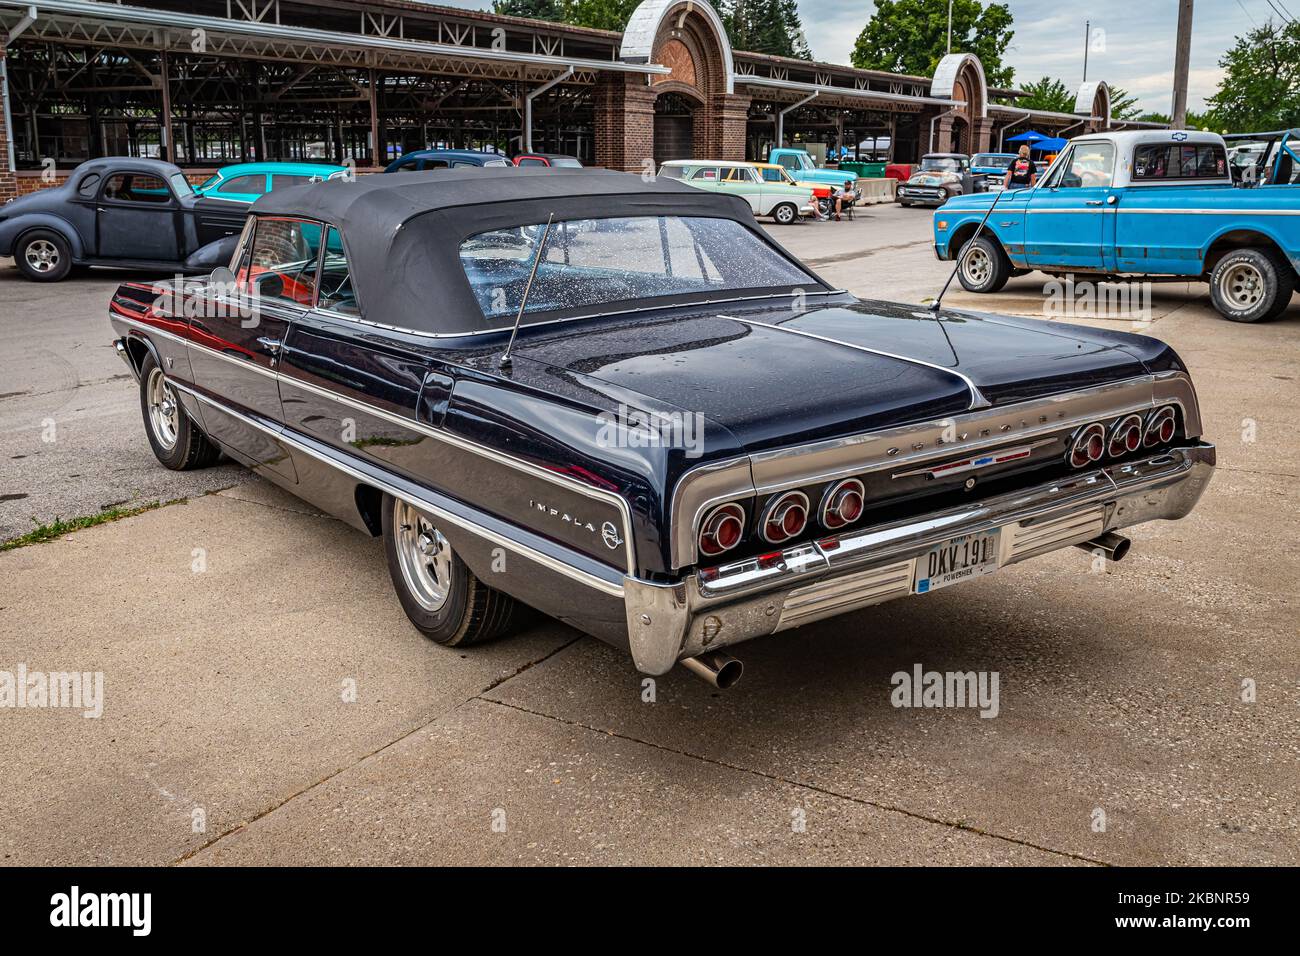 Des Moines, IA - July 01, 2022: High perspective rear corner view of a 1964 Chevrolet Impala Convertible at a local car show. Stock Photo